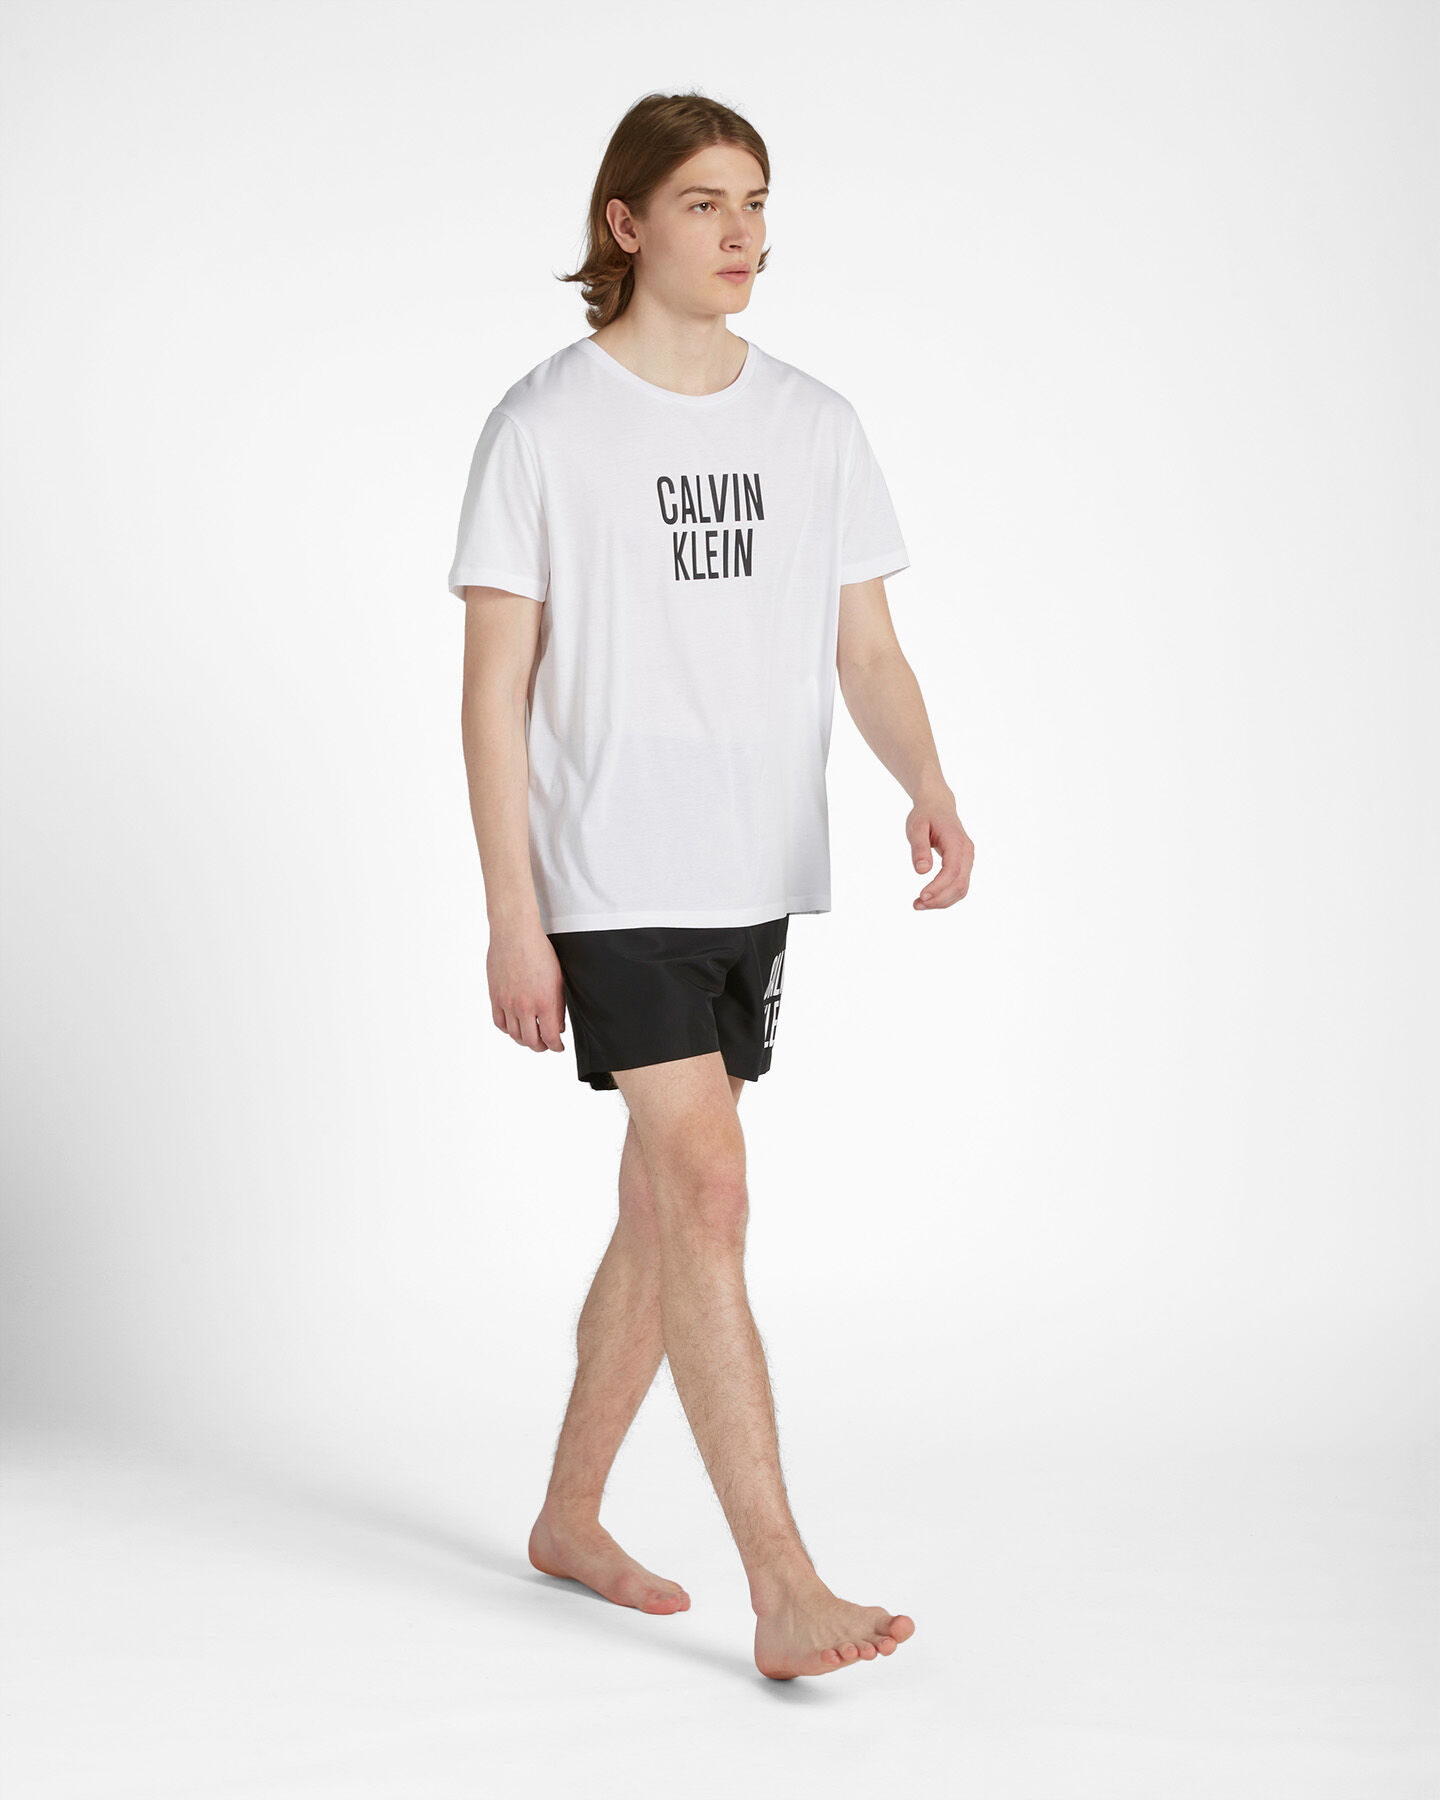  T-Shirt CALVIN KLEIN JEANS LOGO M S4105266|YCD|S scatto 3